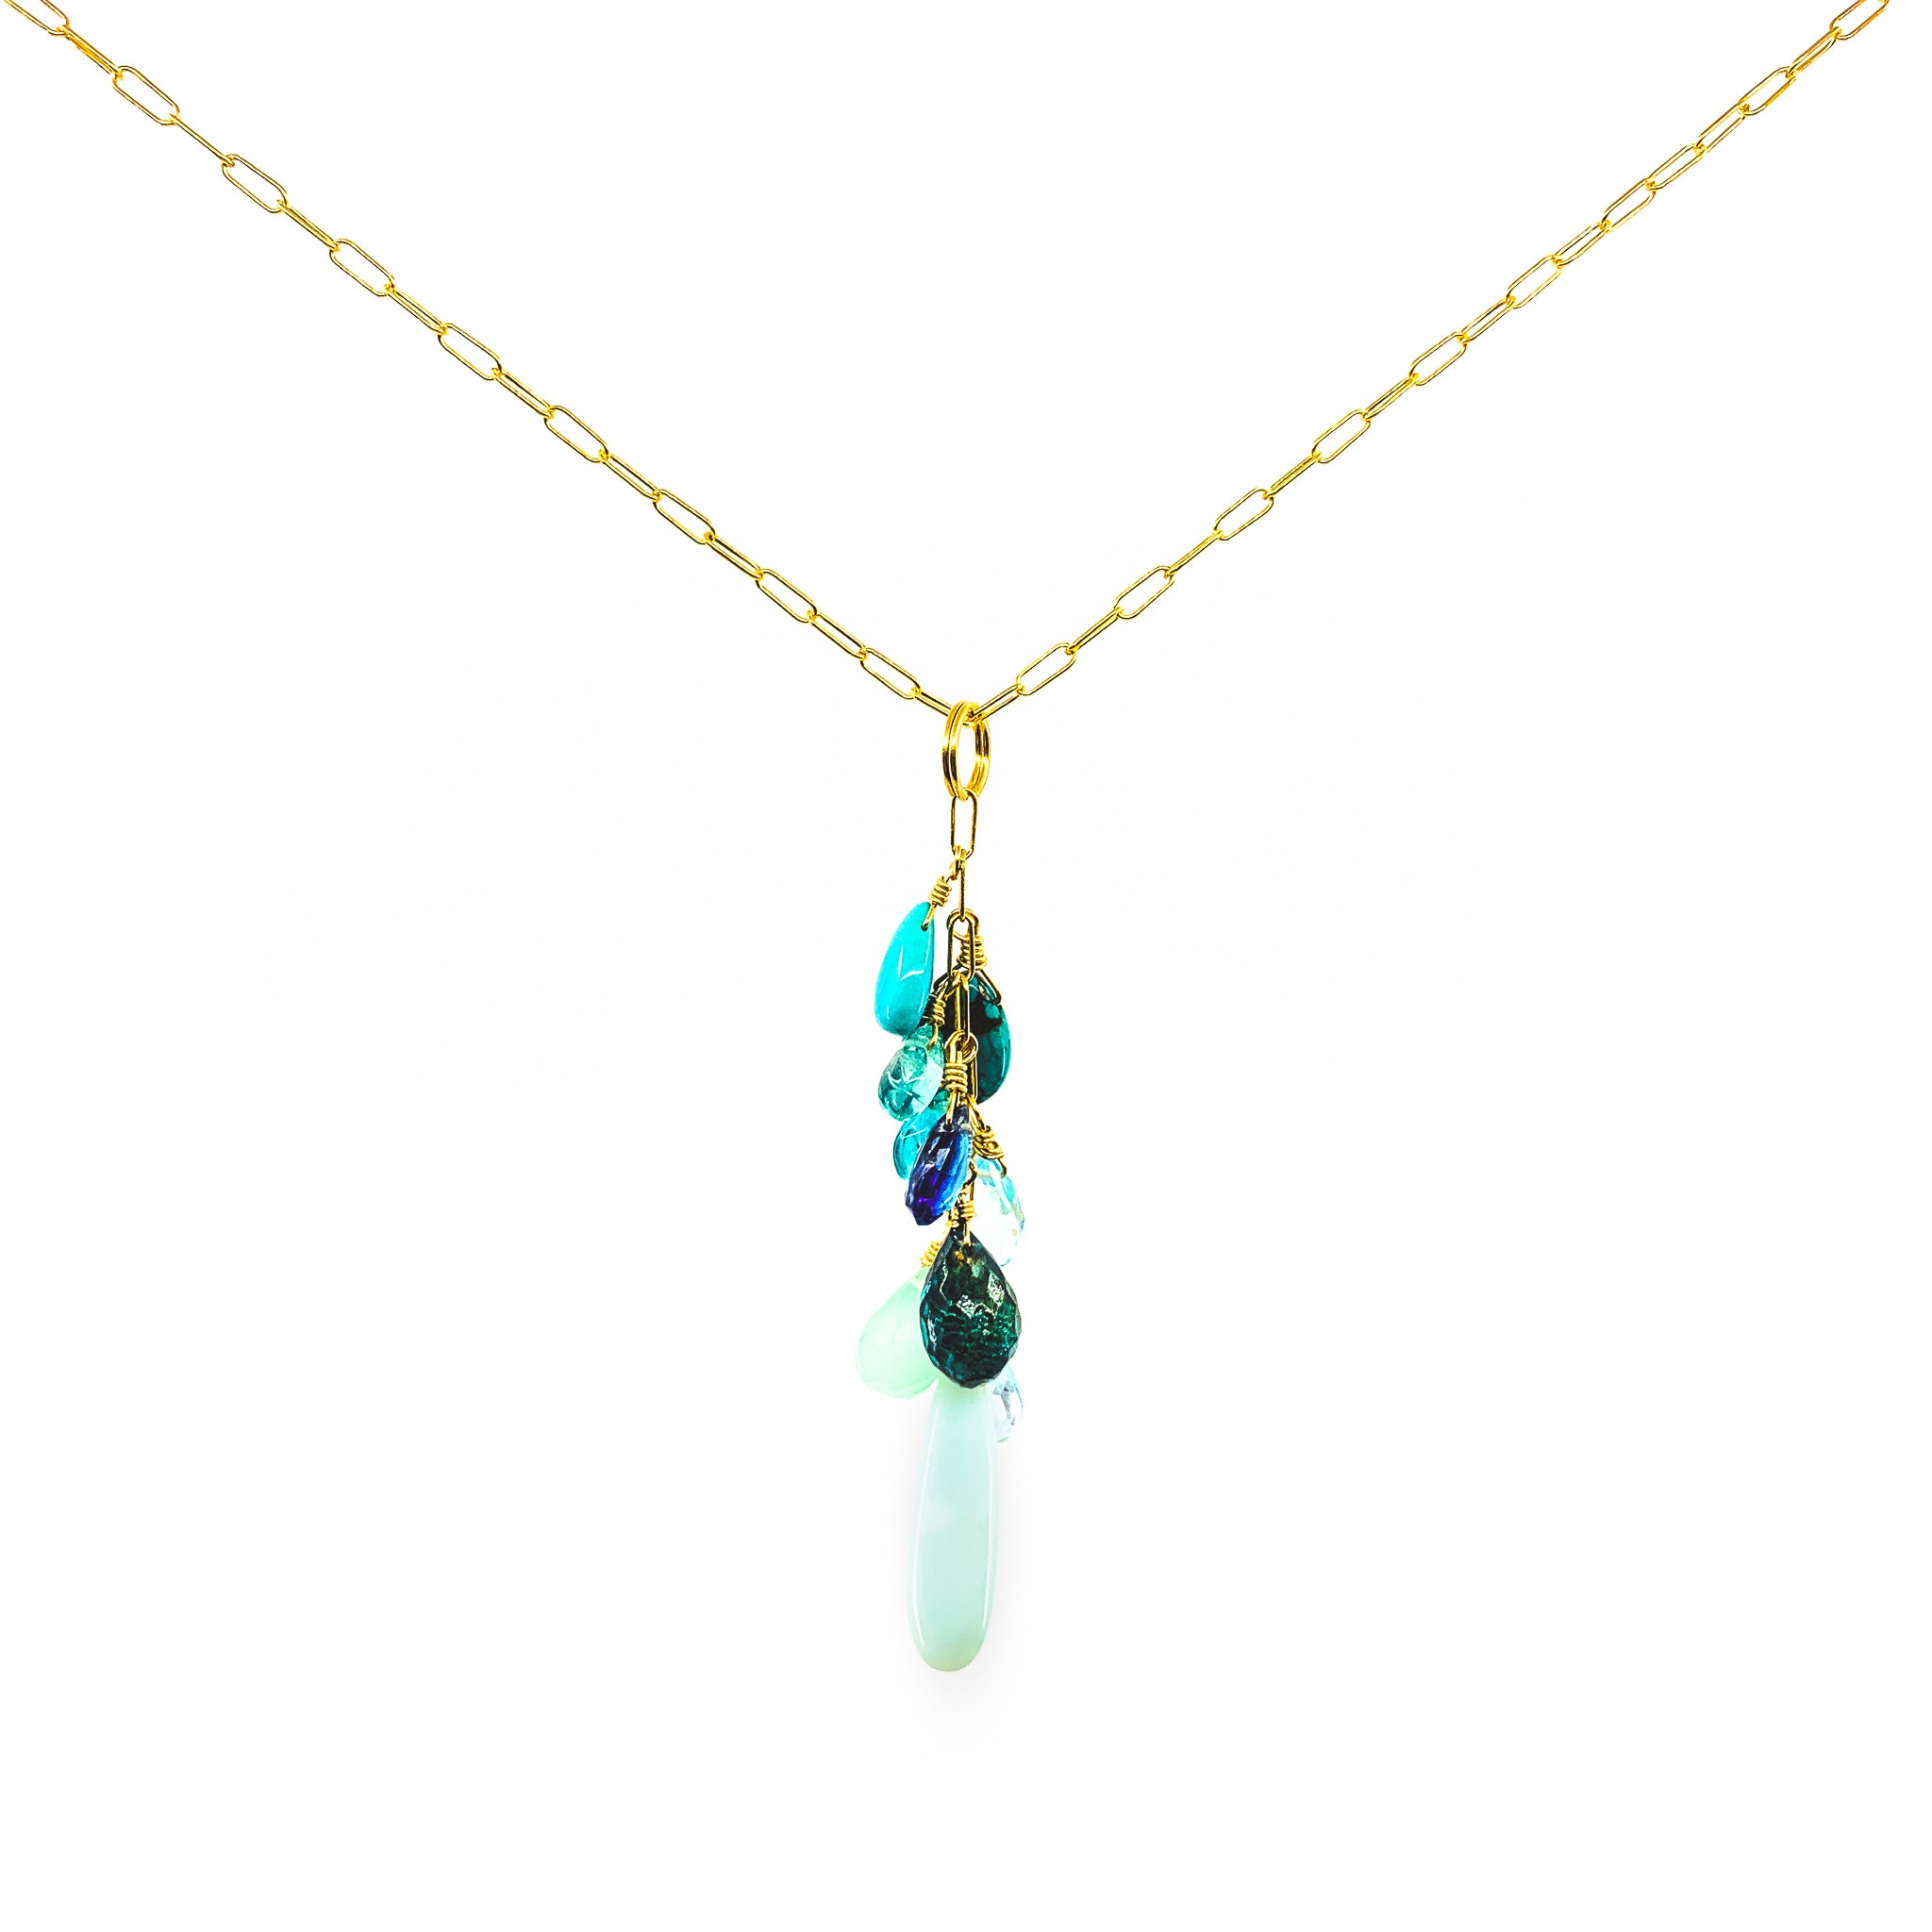 blue gemstones maui ocean necklace by eve black jewelry made in Hawaii  Edit alt text